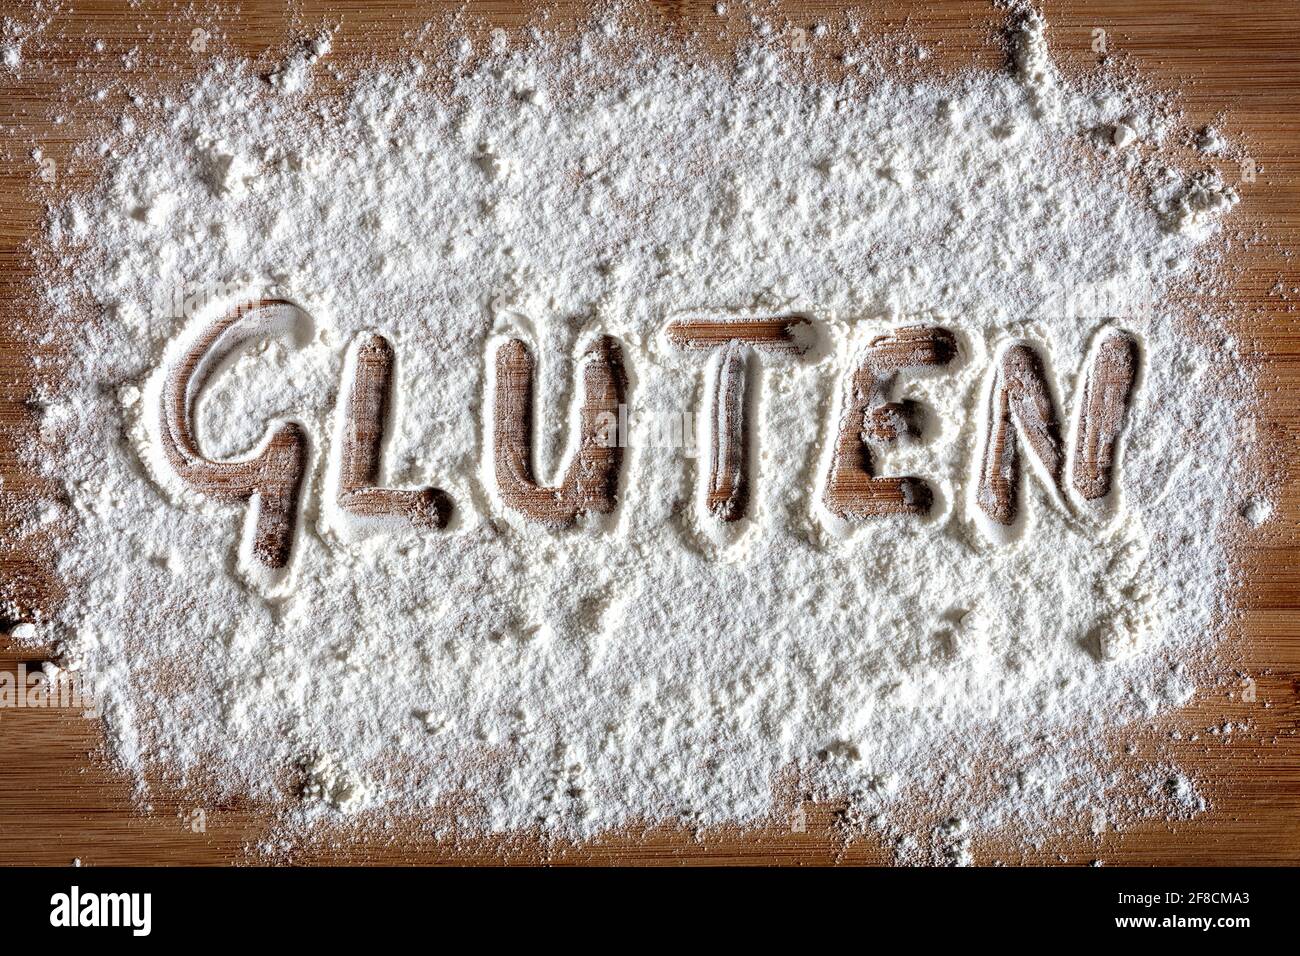 Gluten word written in flour on baking board concept for allergen care and intolerance Stock Photo